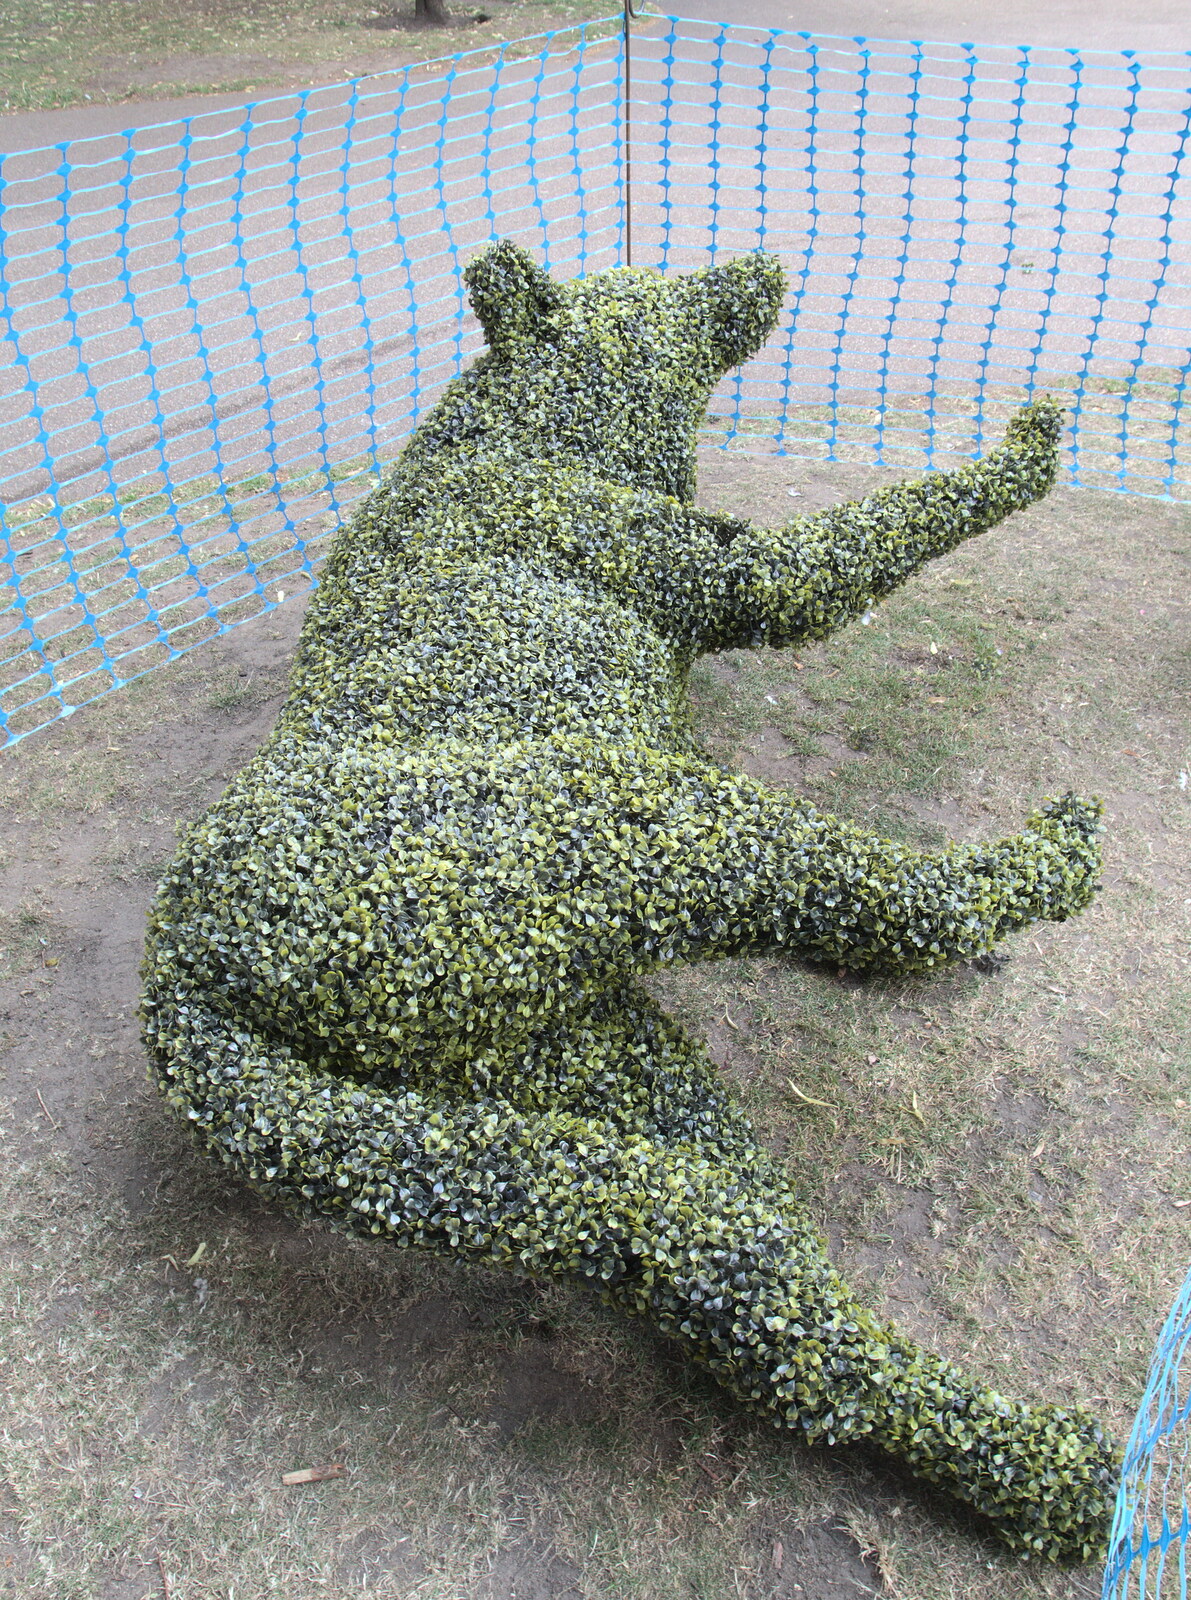 In Abbey Gardens, there's some animal topiary from The BBs at Bacton, and Abbey Gardens, Bury St. Edmunds, Suffolk - 19th July 2015